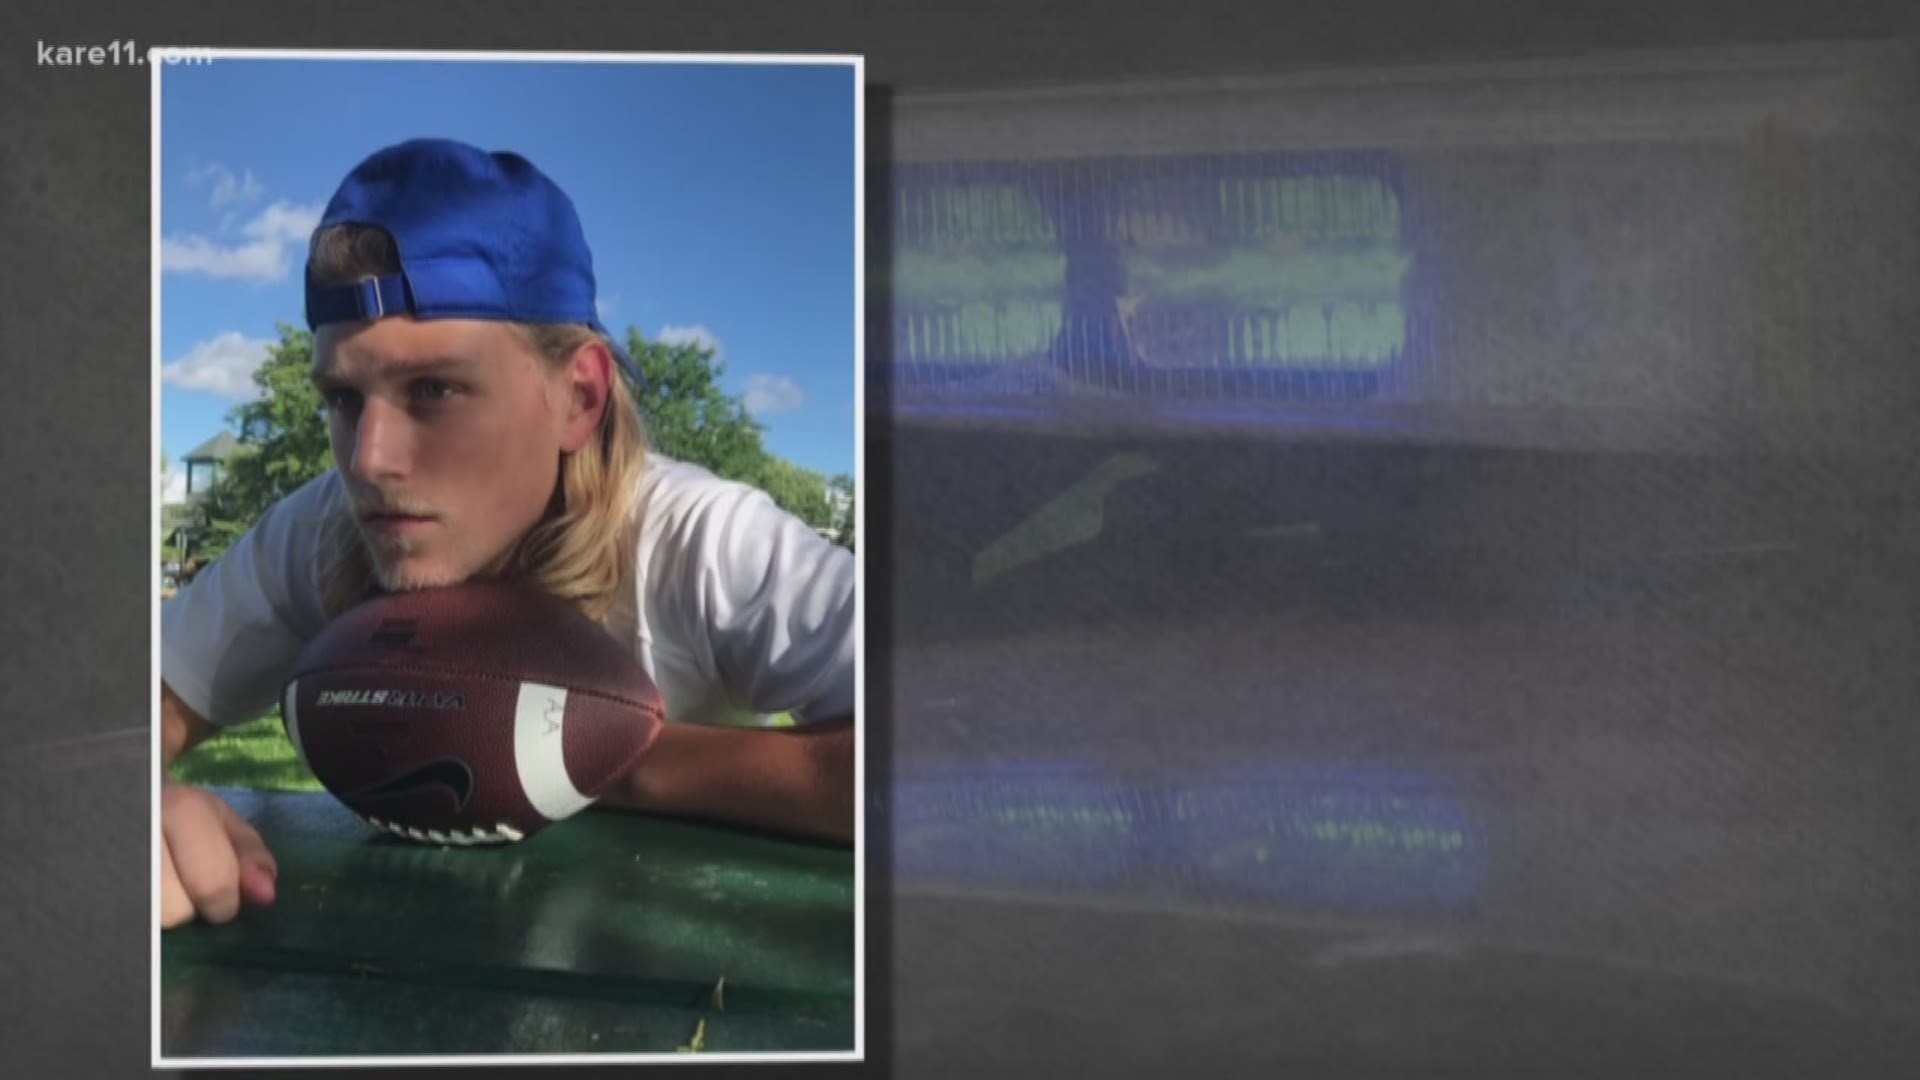 After a teenager's tragic death, KARE 11 discovers where you live may affect the help you get in a mental health crisis.